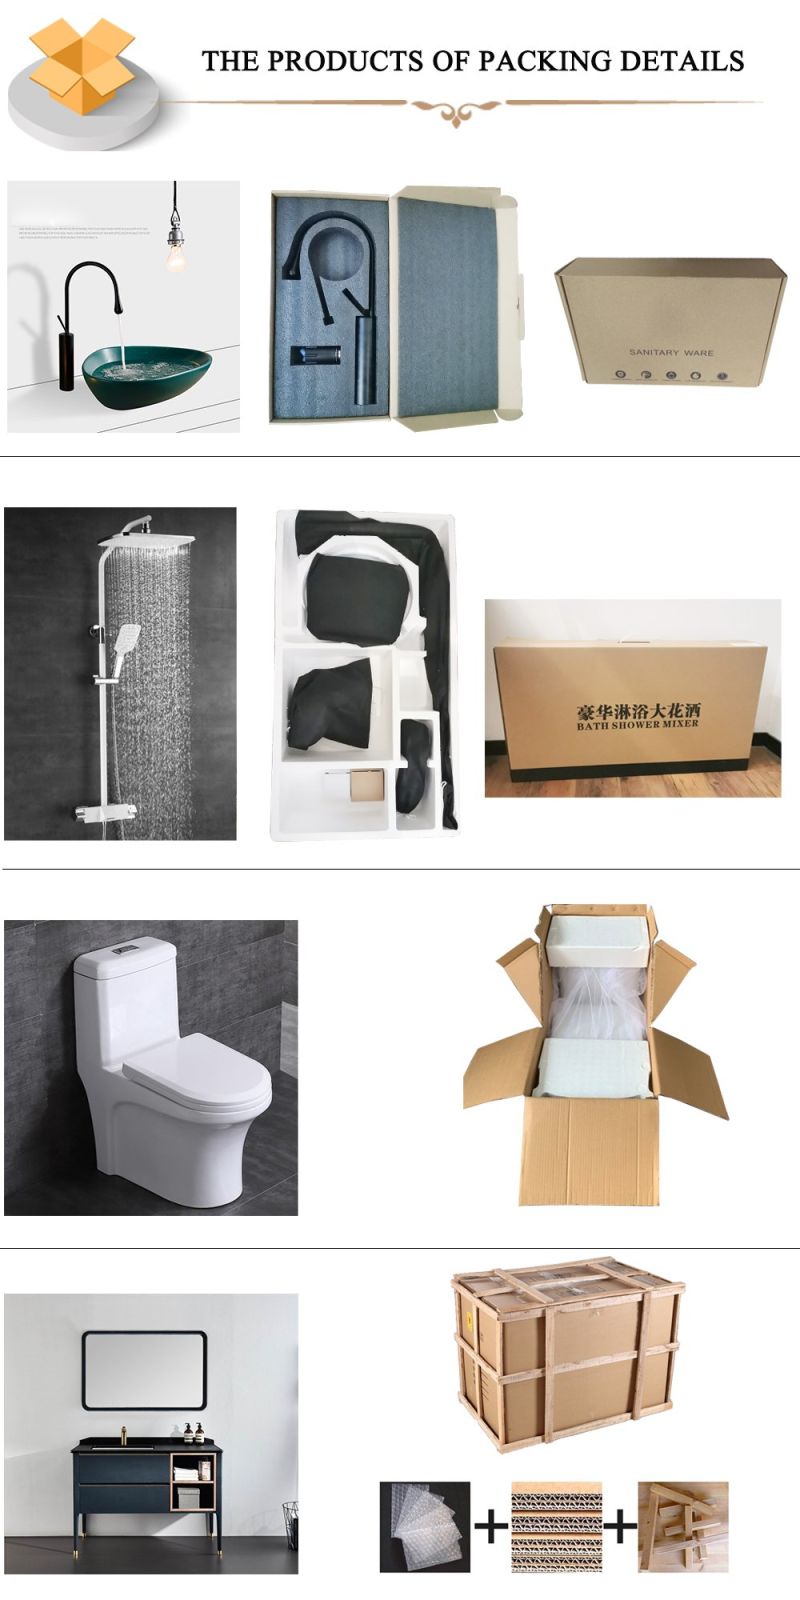 Wc Sanitary Toilet Bowl Intelligent Cover Smart PP Cover Seat